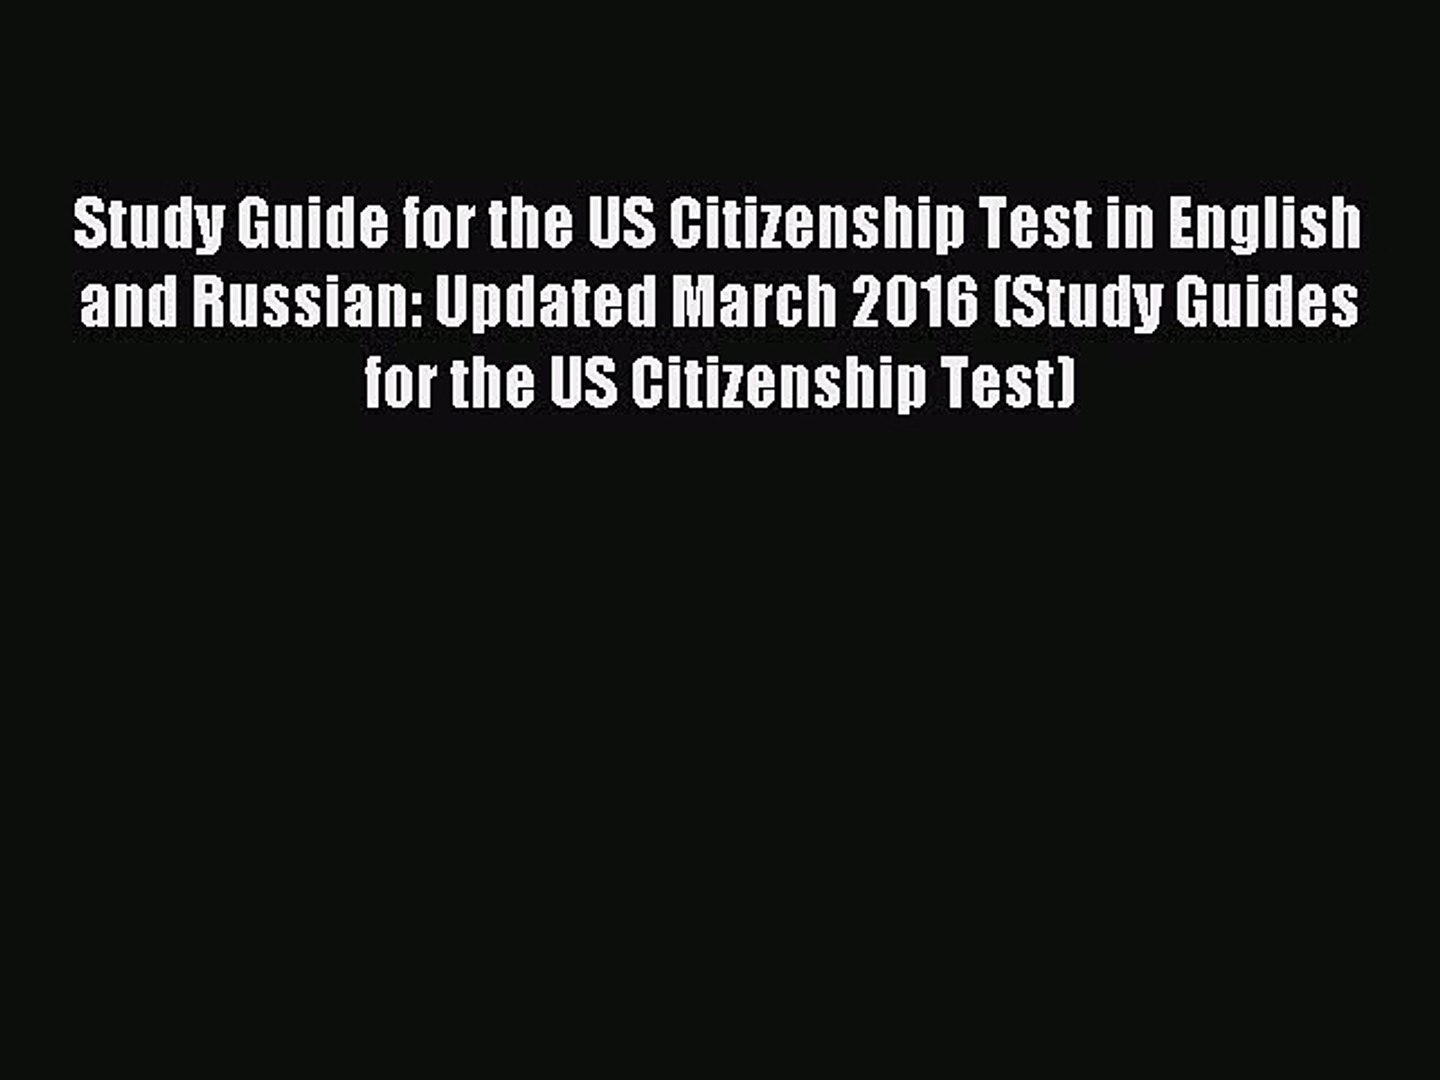 Download Study Guide for the US Citizenship Test in English and Russian: Updated March 2016